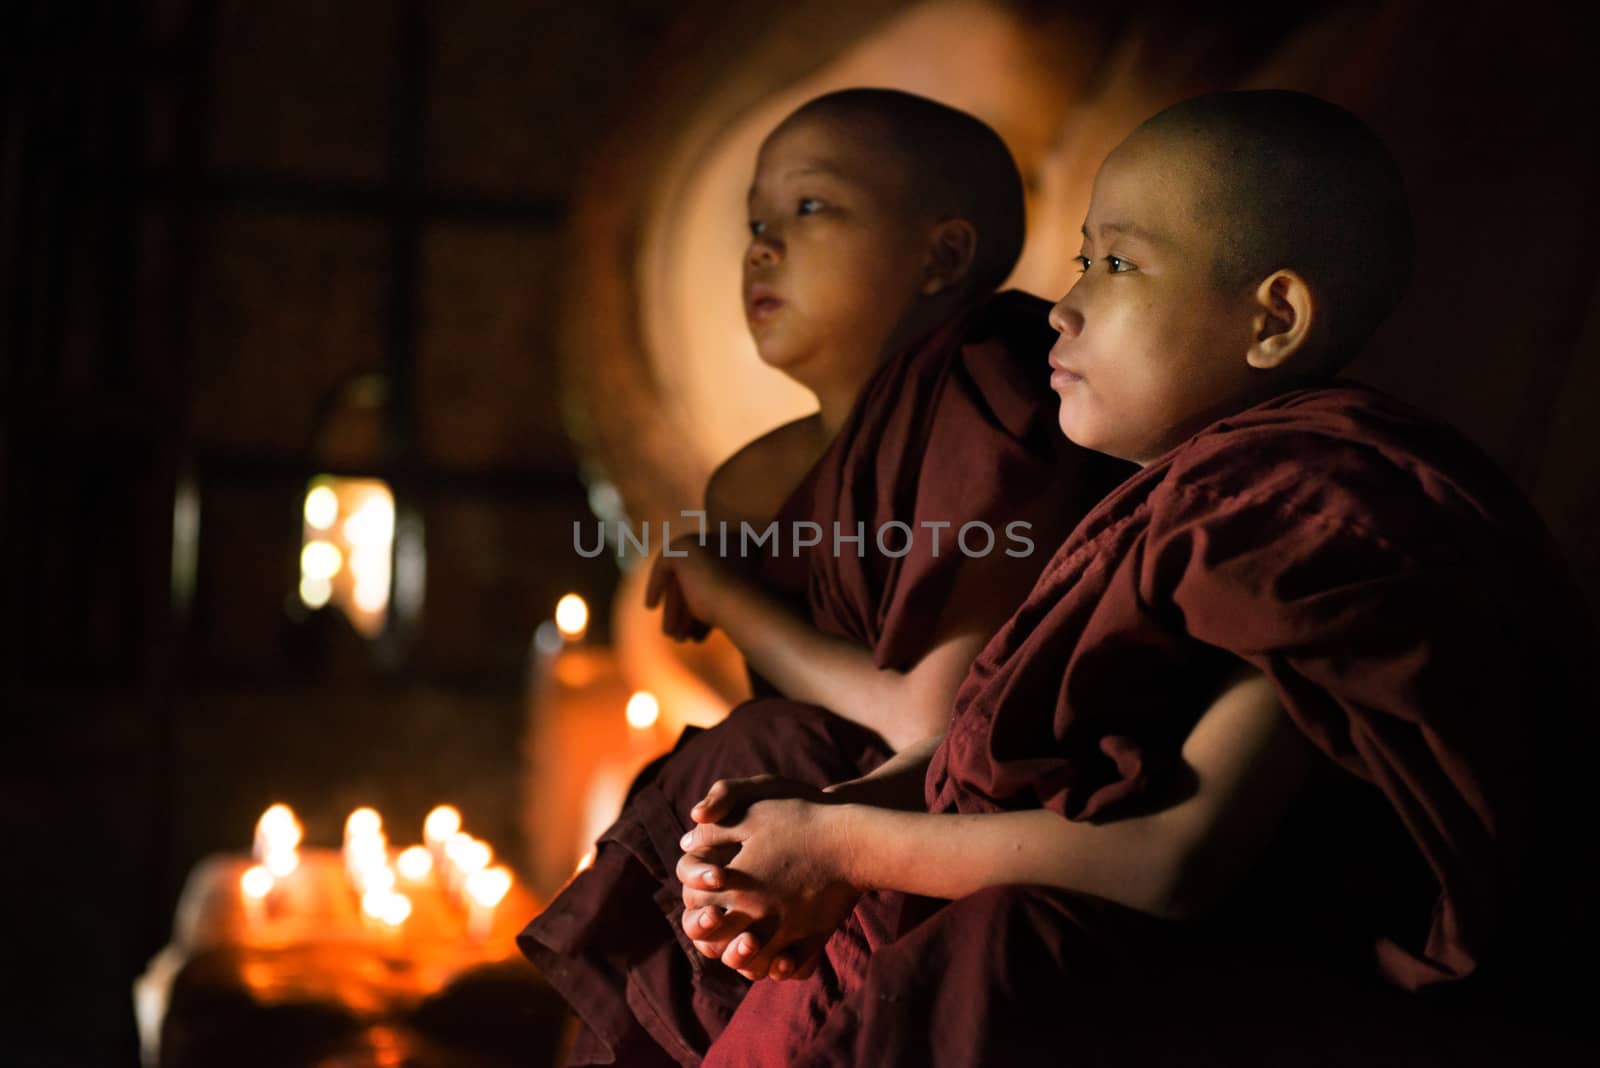 Young novice monks sitting inside a Buddhist temple, Bagan, Myanmar.